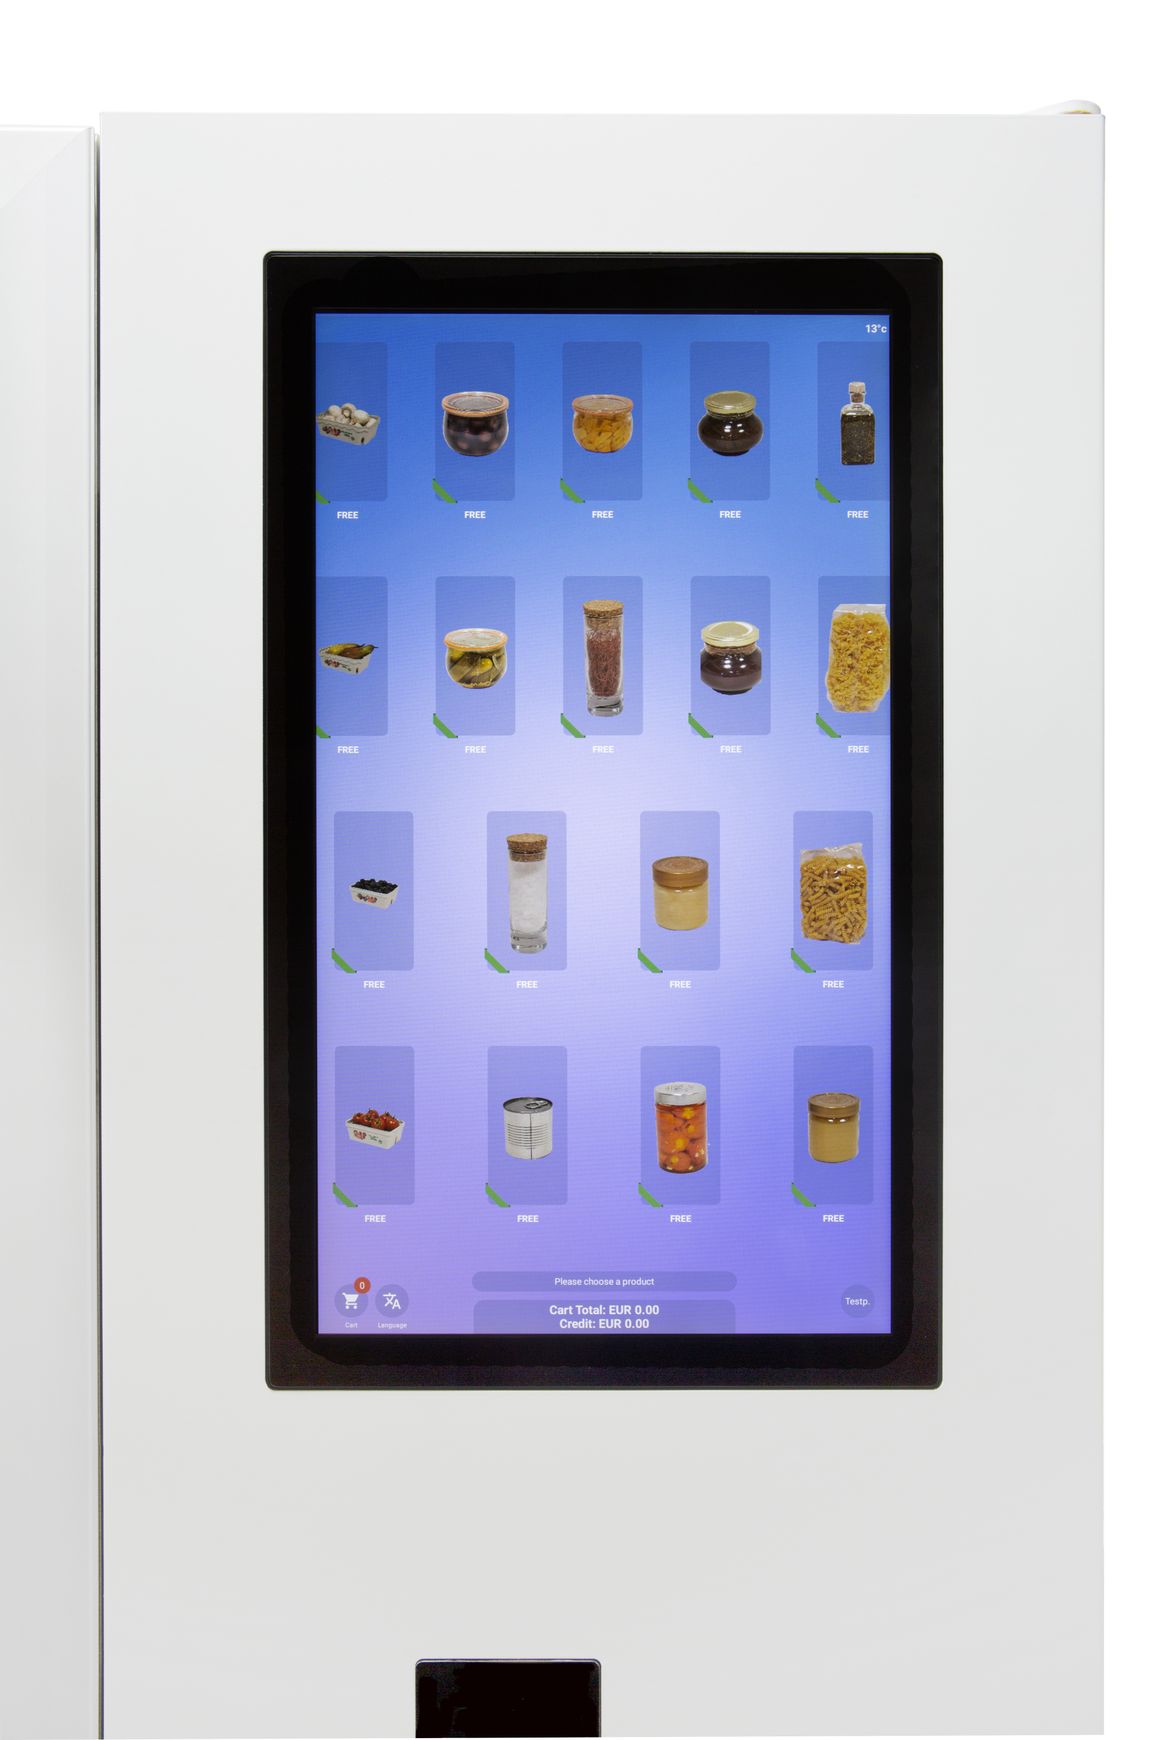 Touch screen of vending machine